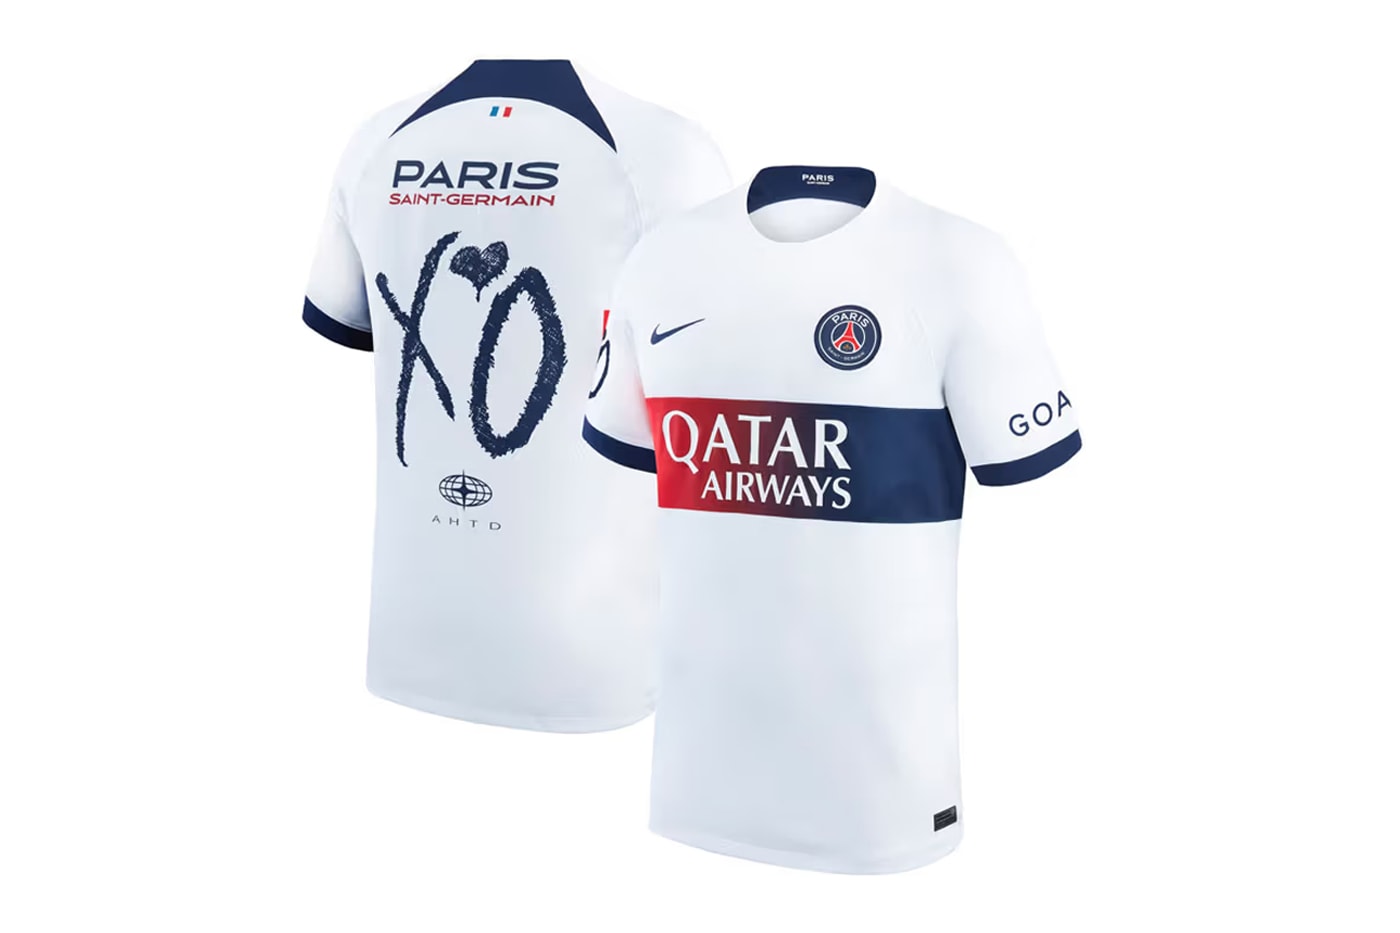 Discover PSG's new kit in collaboration with The Weeknd - HIGHXTAR.